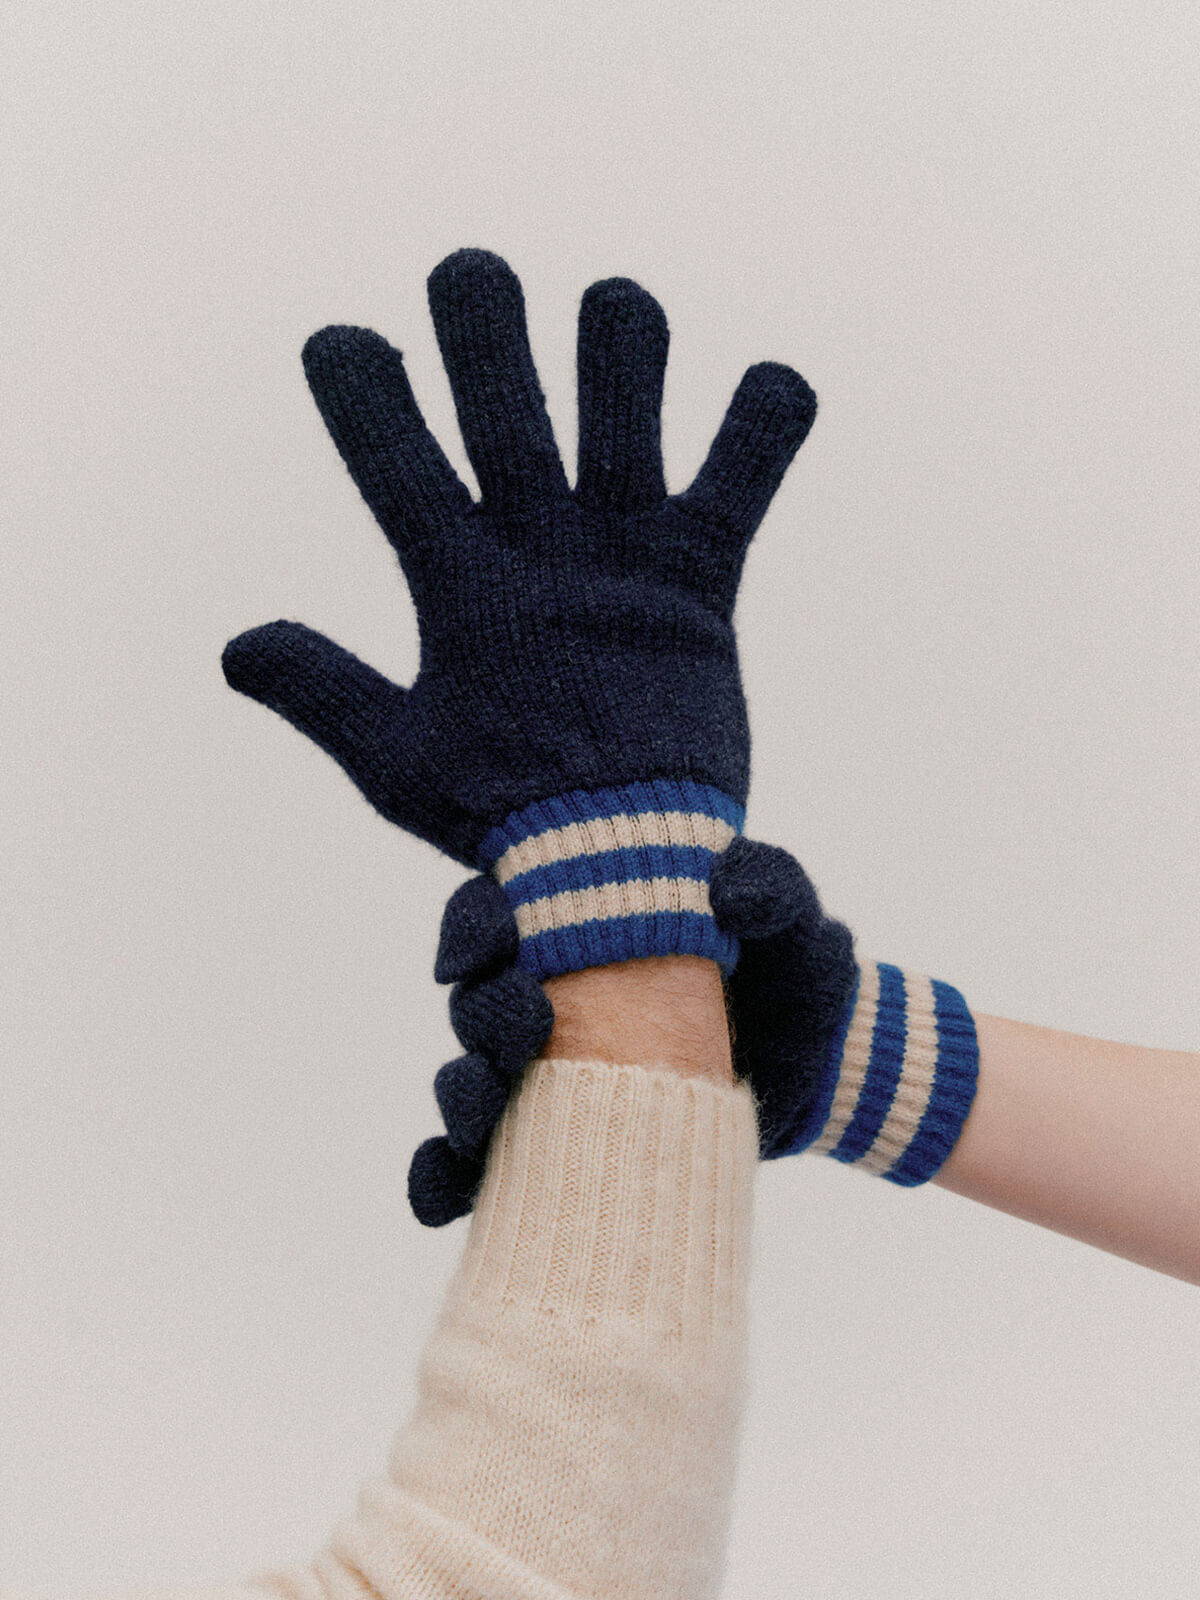 A look book image of a model's hands wearing a pair of navy Howlin' gloves.